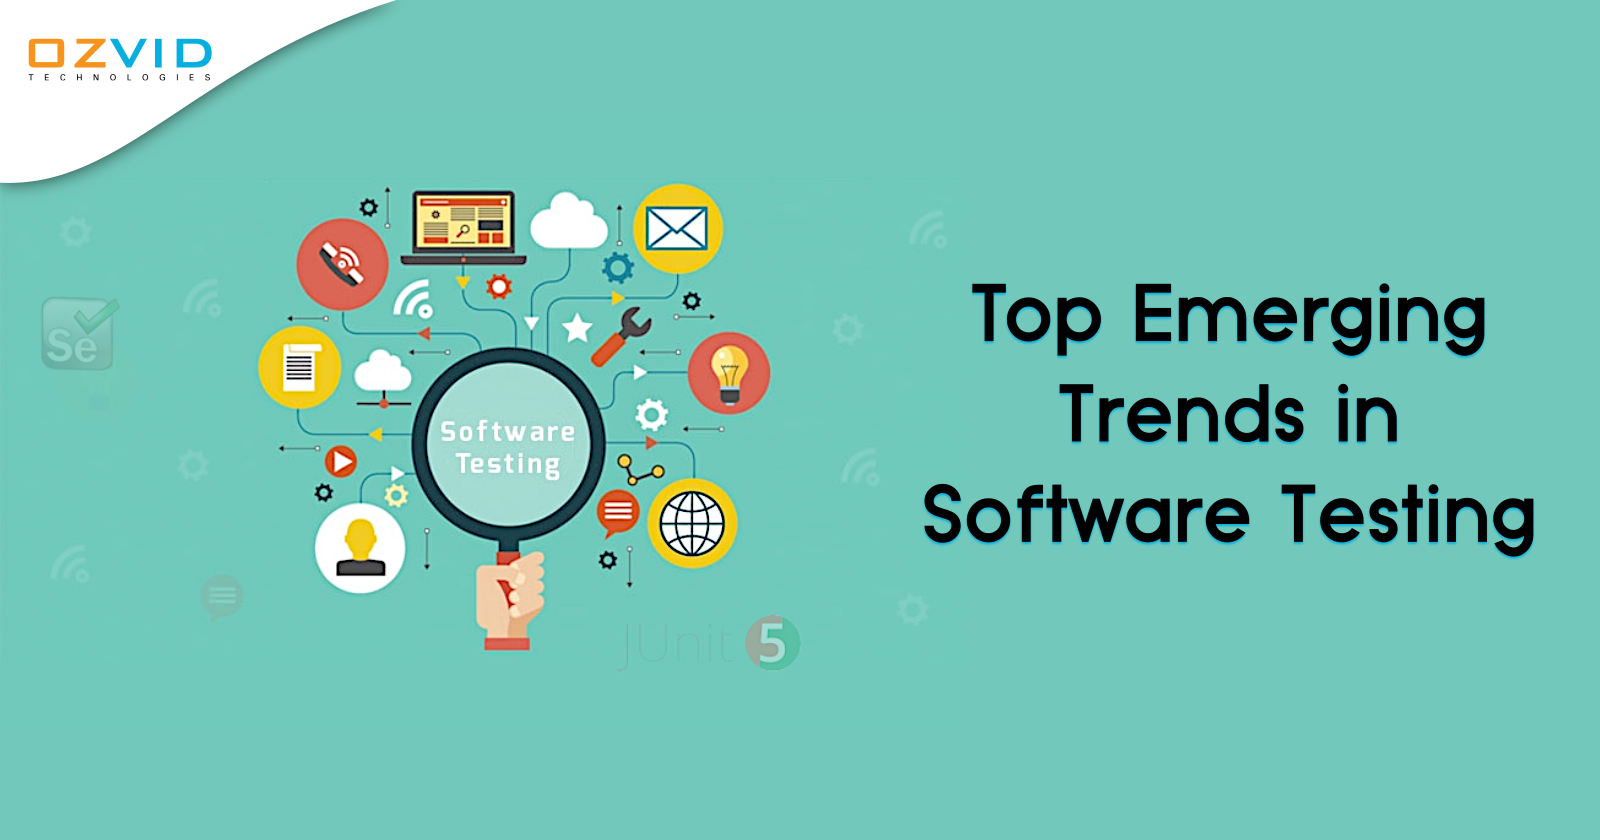 Top Emerging Trends in Software Testing